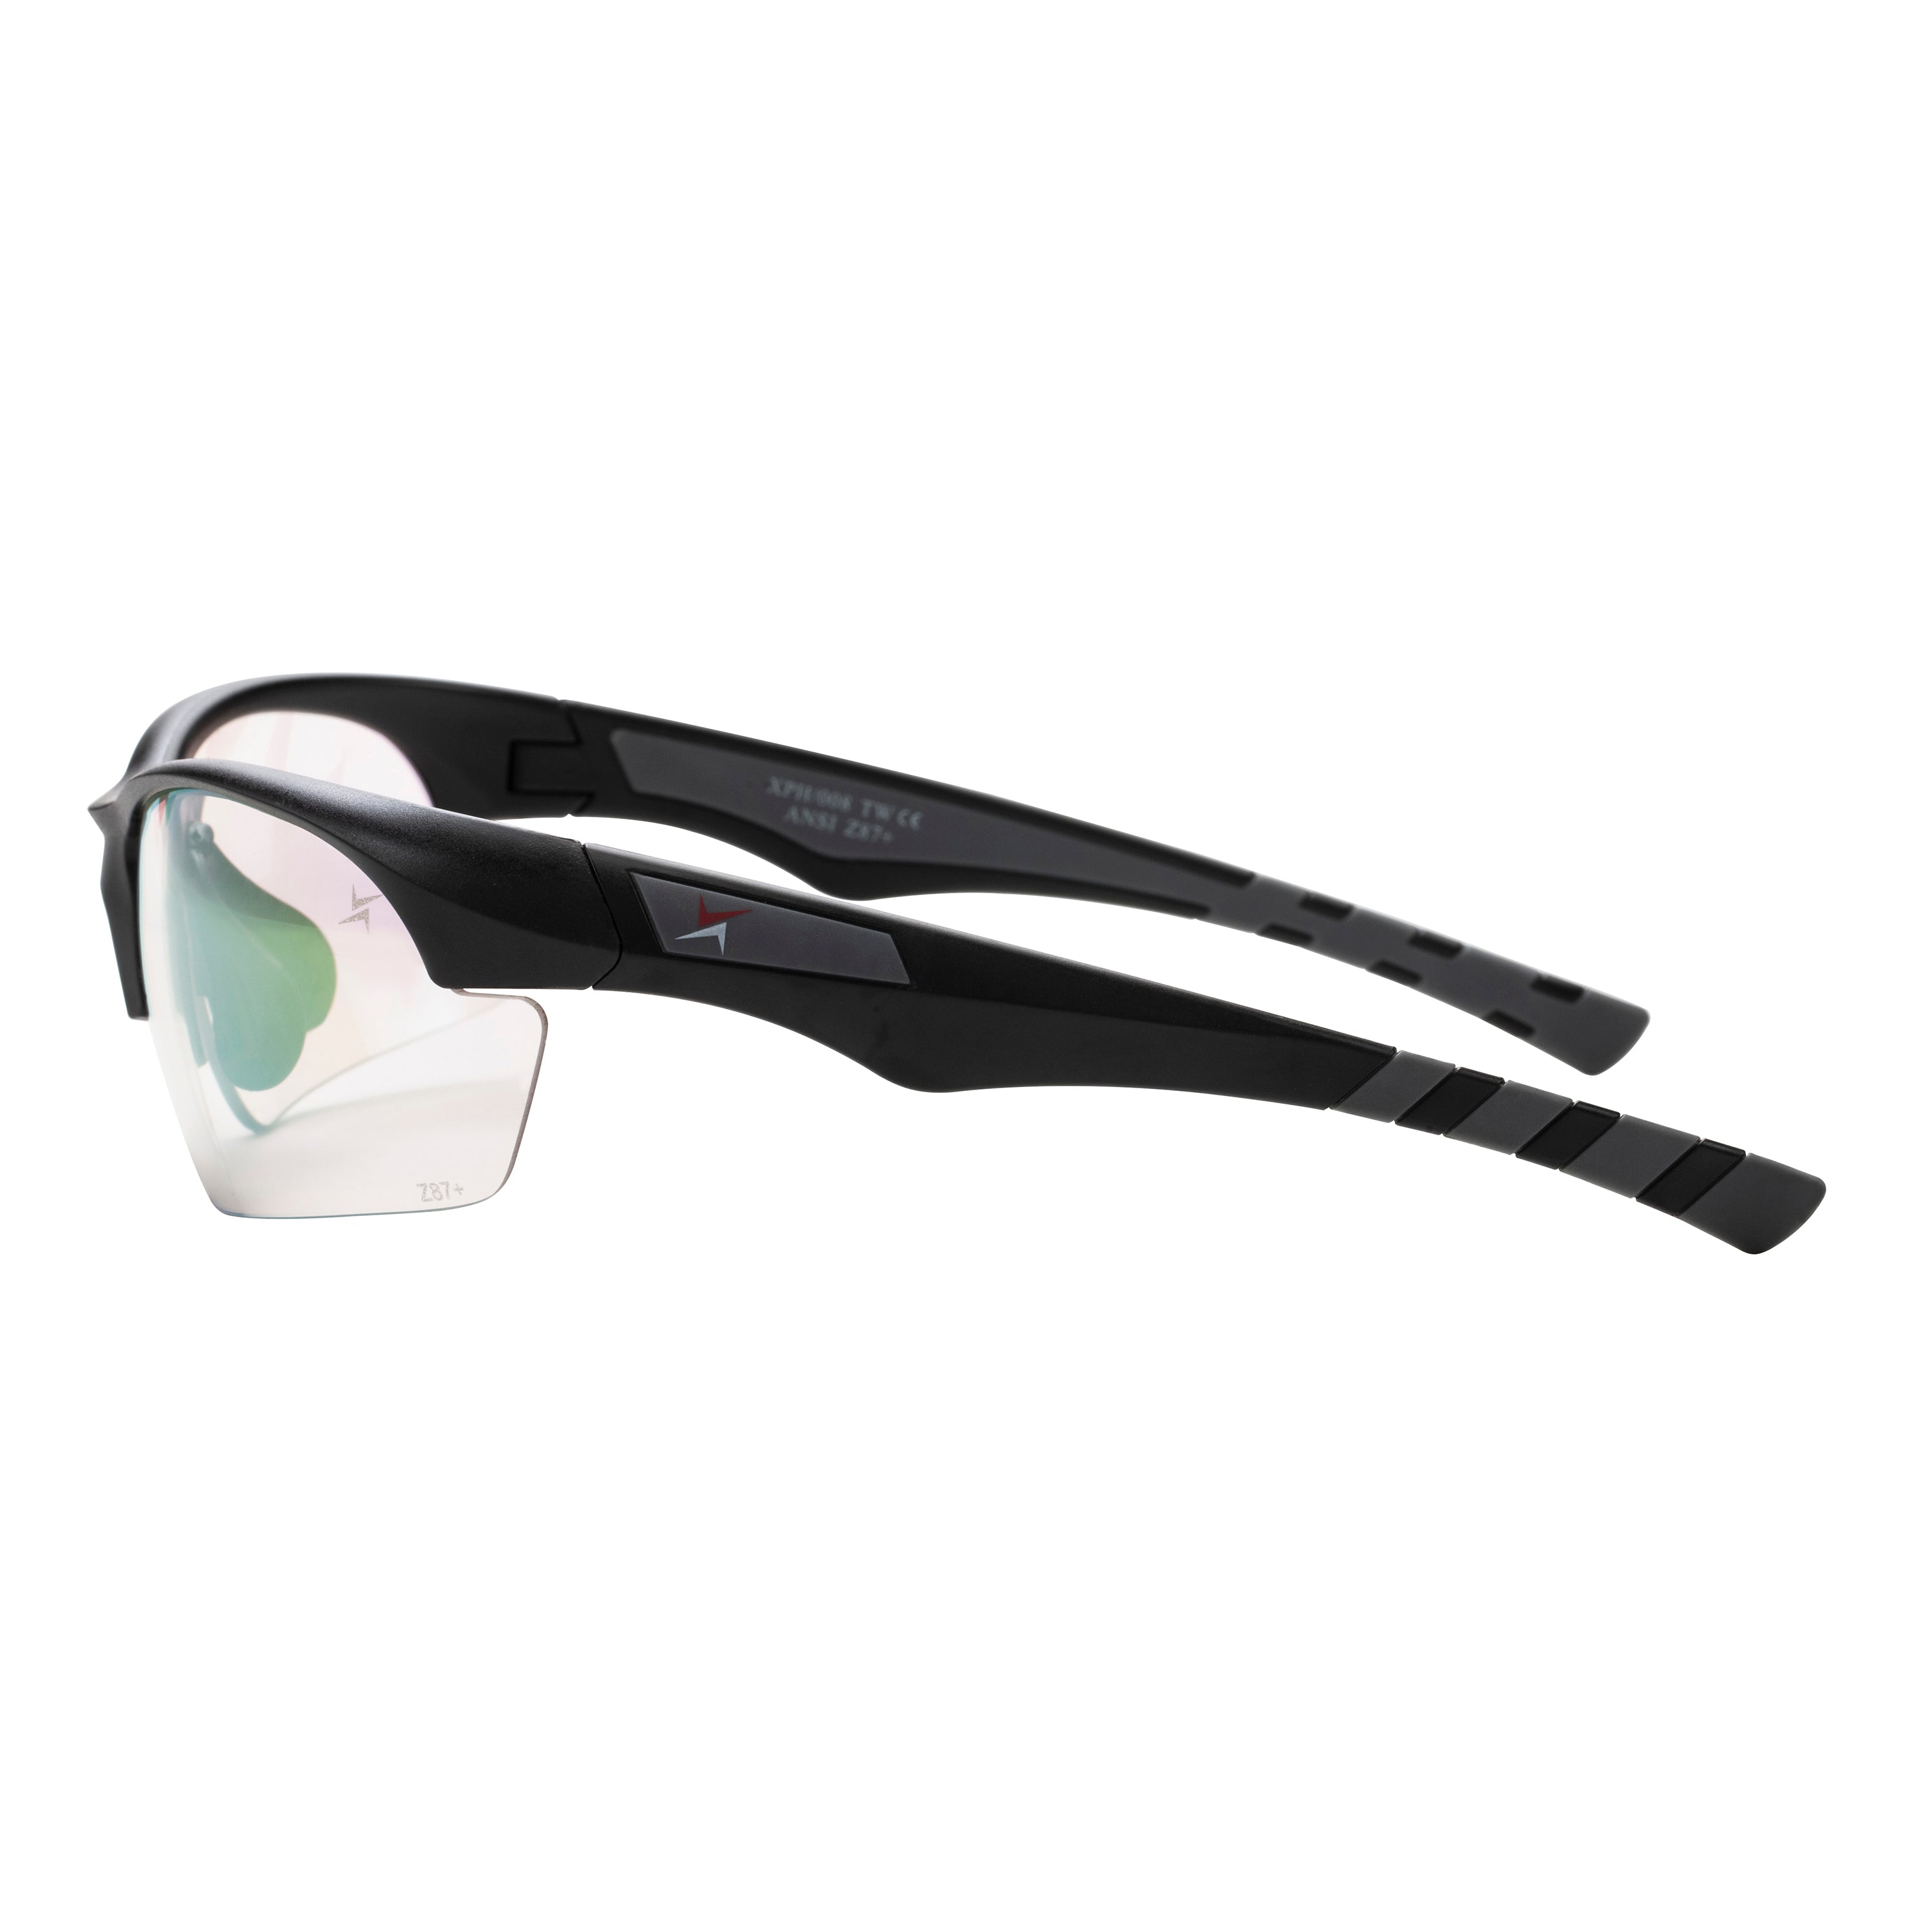 Photochromic 008-1 Clear to Brown Lens